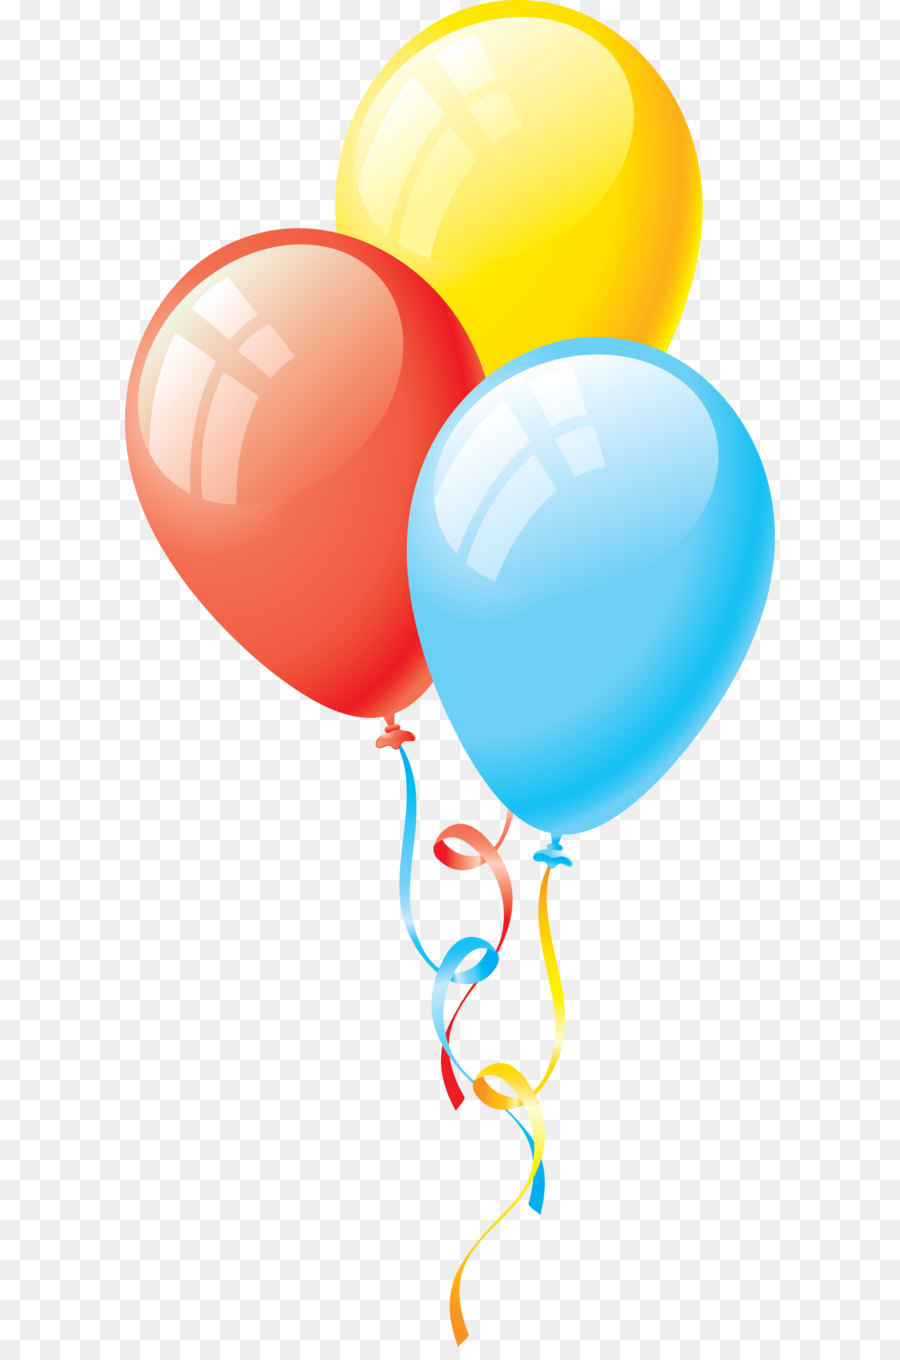 Balloon Clip art - Balloons Png 5 png download - 1953*4048 - Free Transparent Balloon png Download.